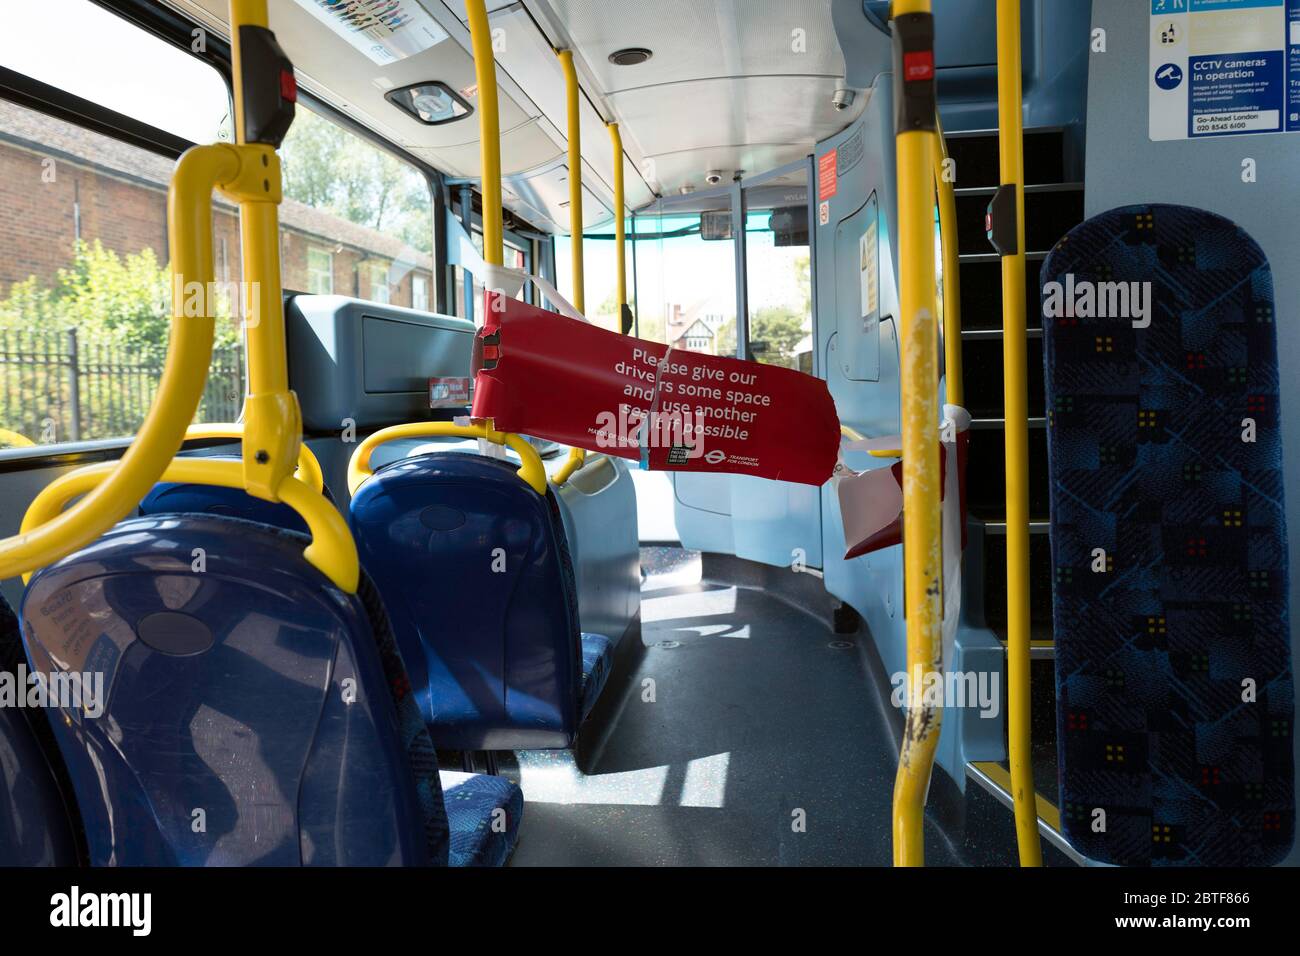 Bus interior with sign telling passengers not to stand close to the driver Stock Photo